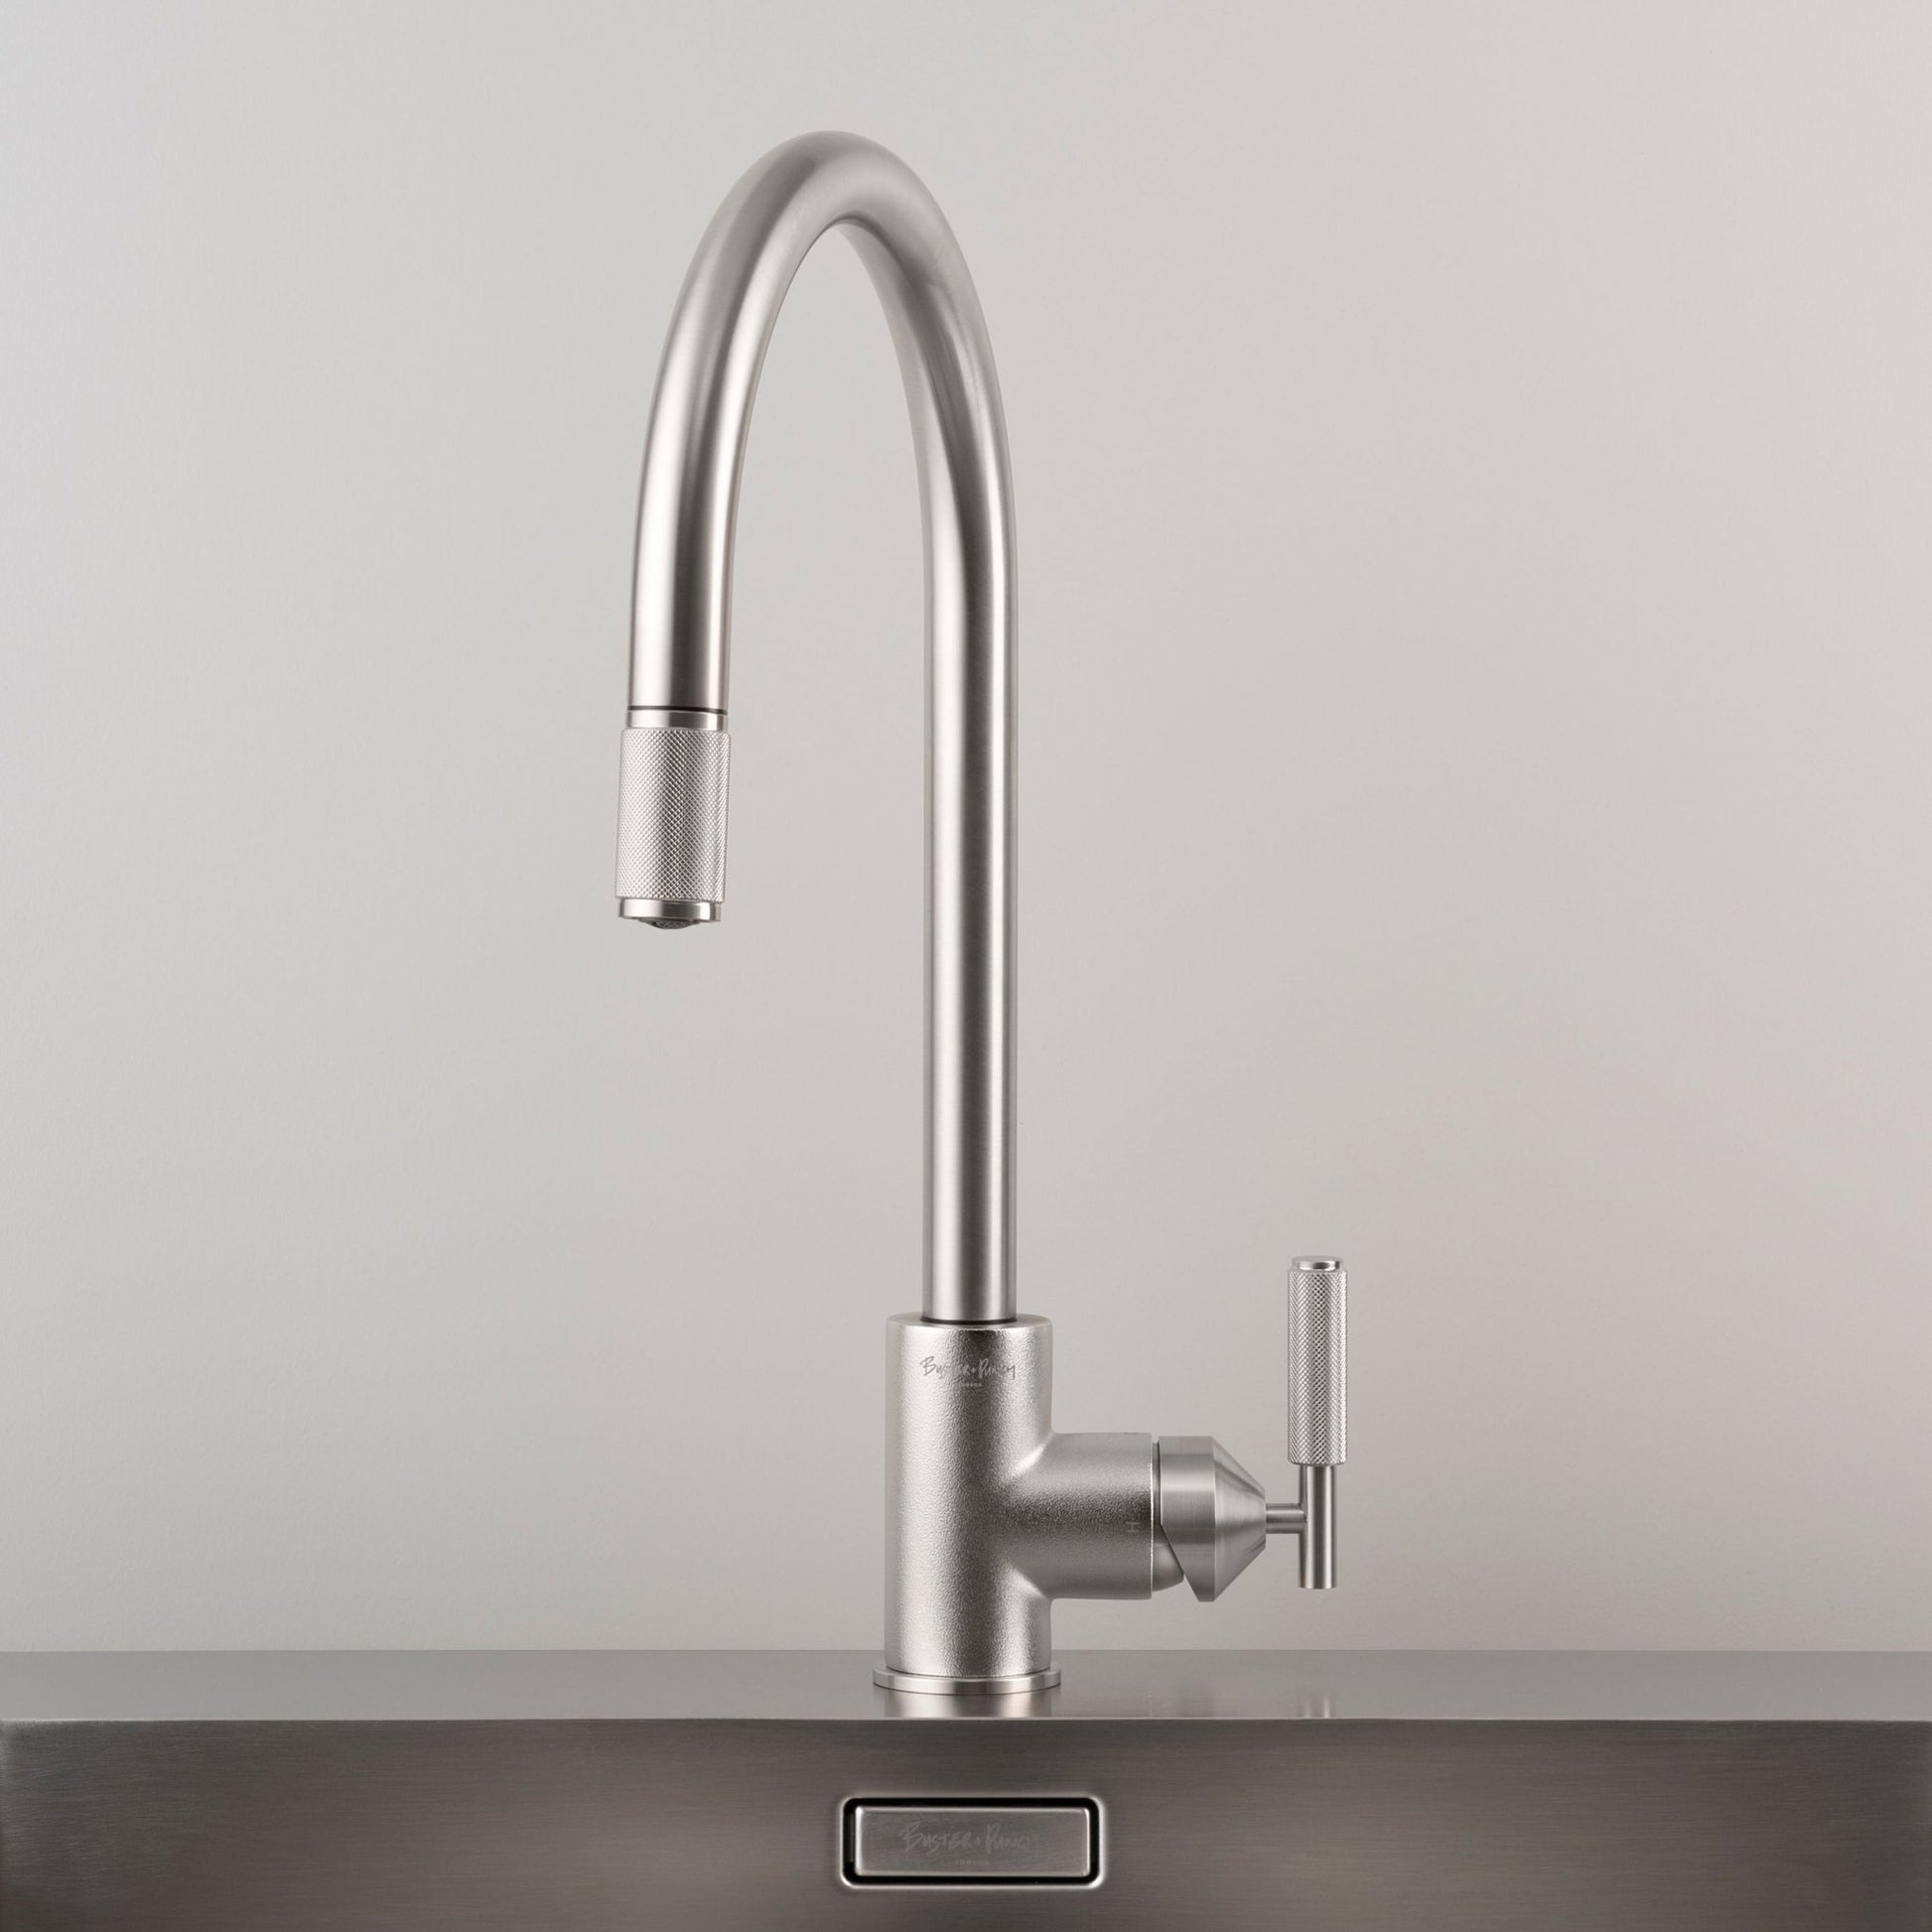 Luxury Buster and Punch Pull Out Kitchen Faucet STEEL - |VESIMI Design| Luxury and Rustic bathrooms online